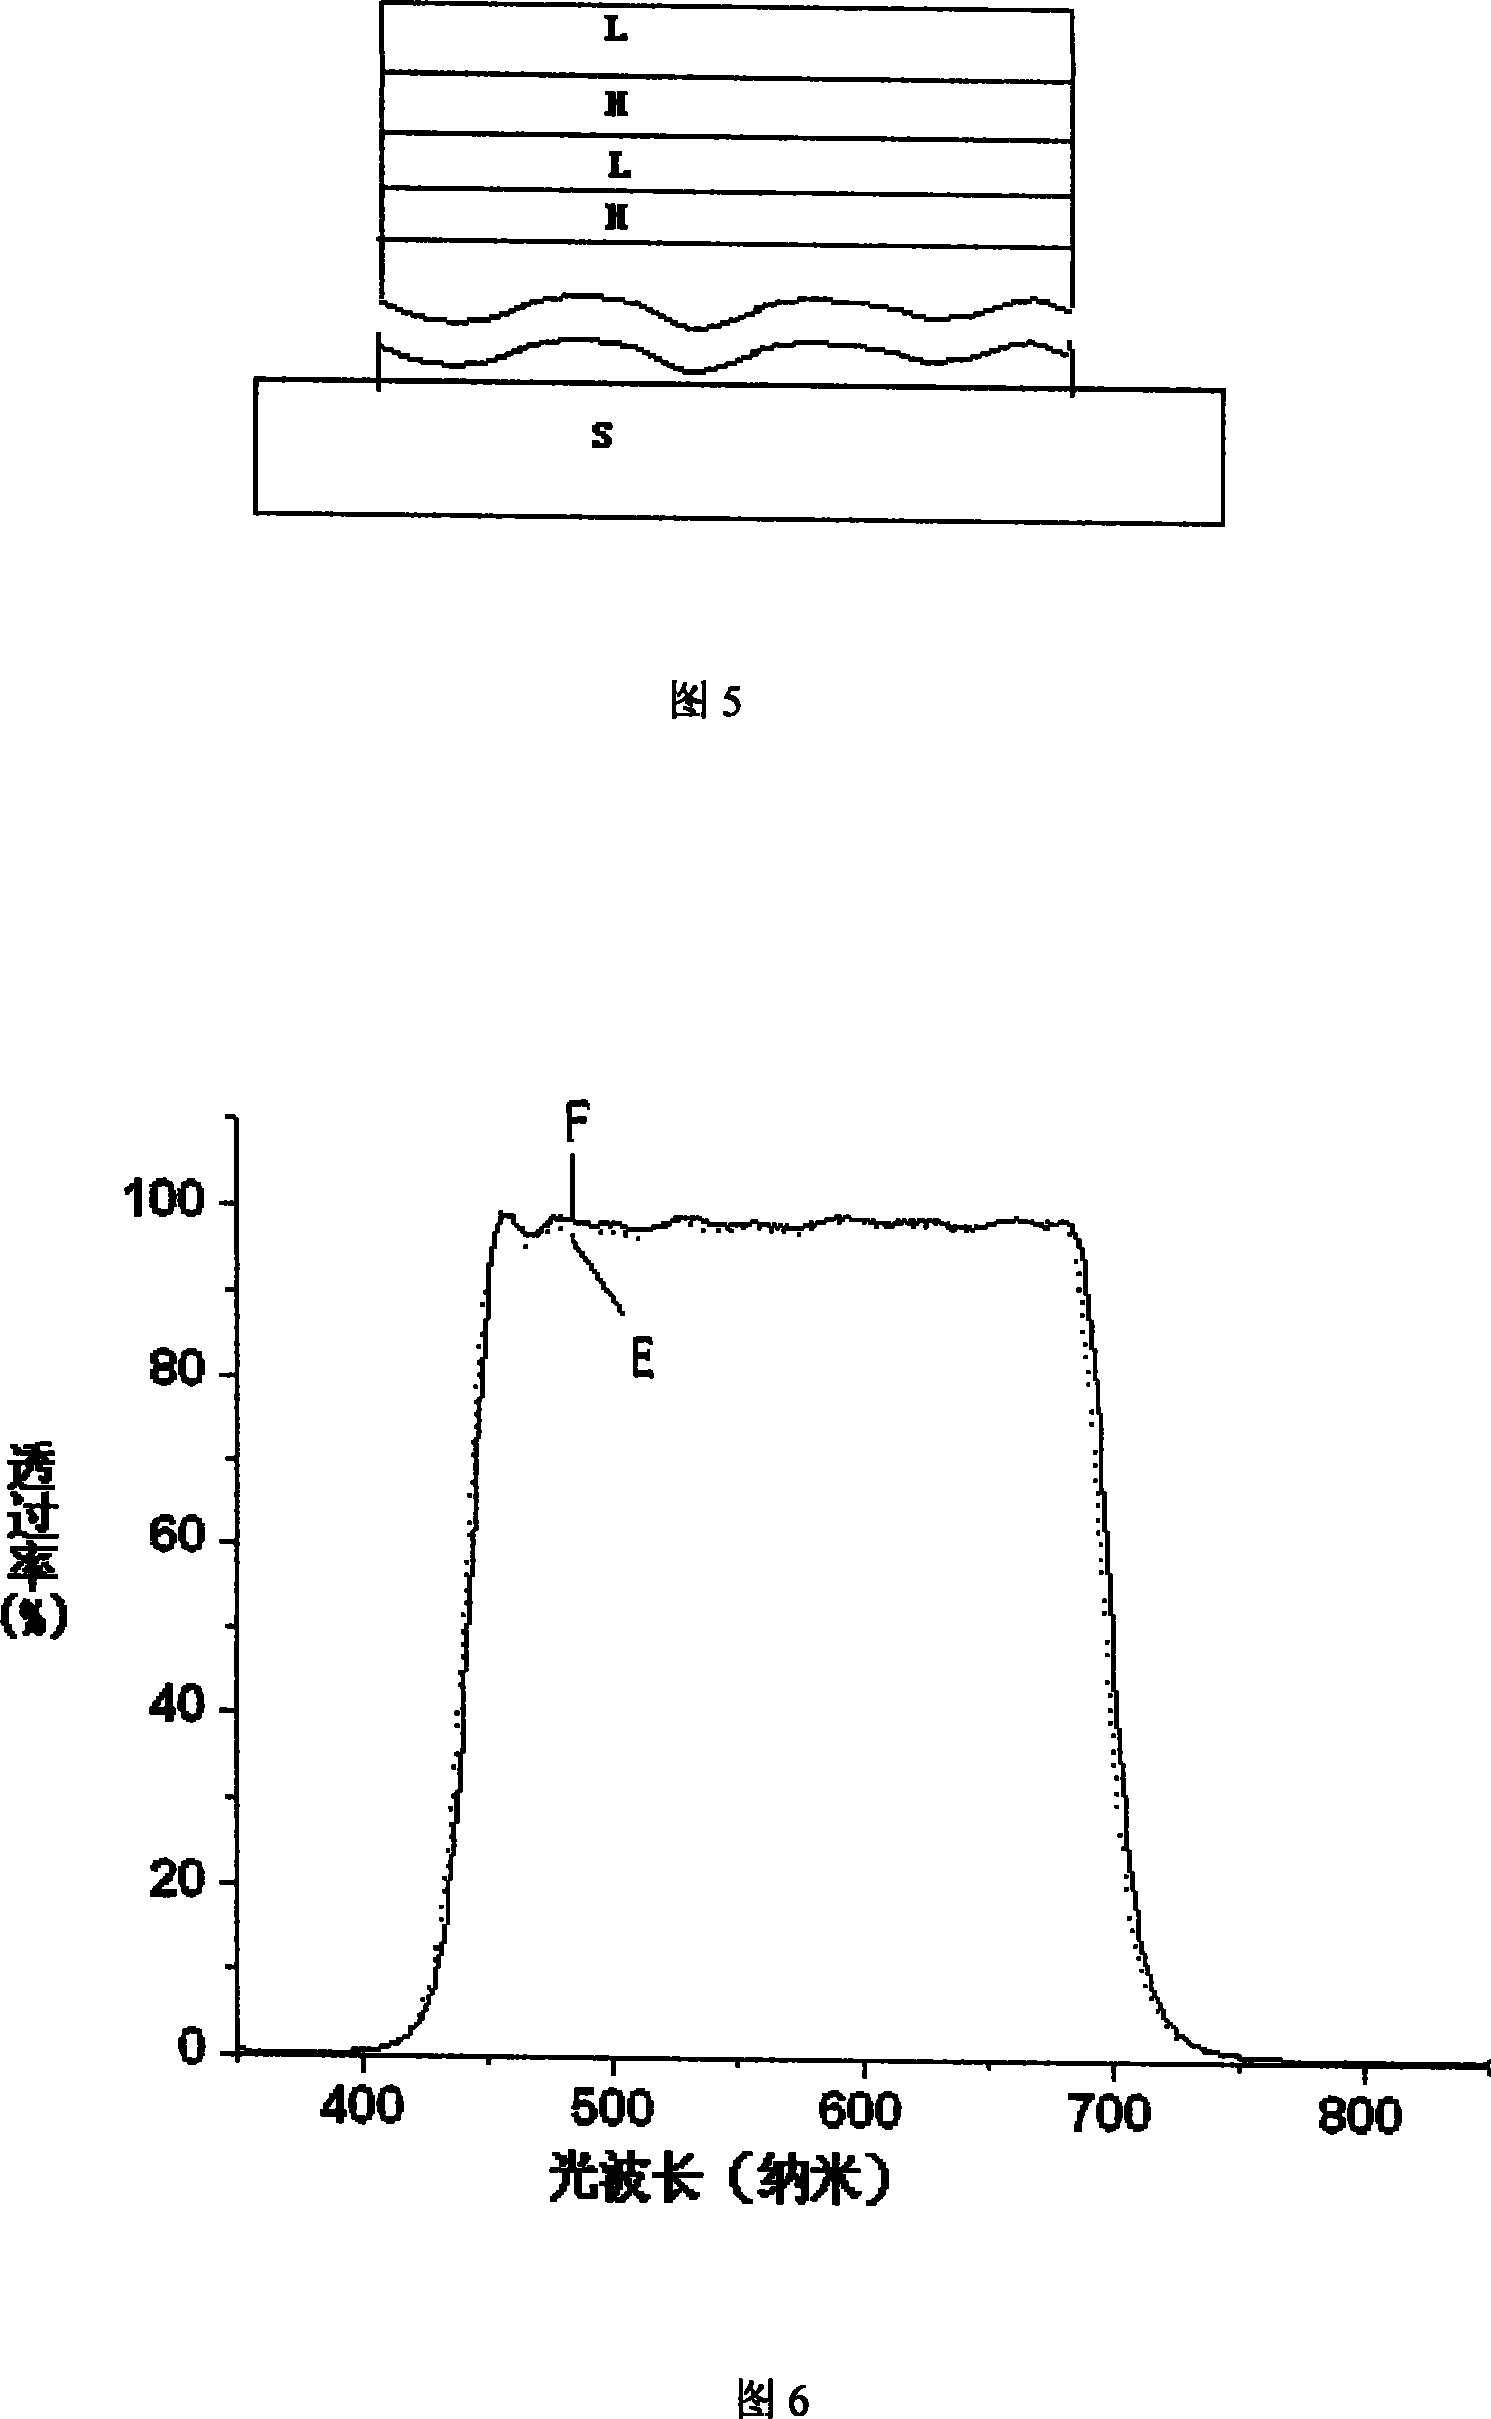 High-temperature-resistant optical film doped with stabilized zirconia and method for preparing same